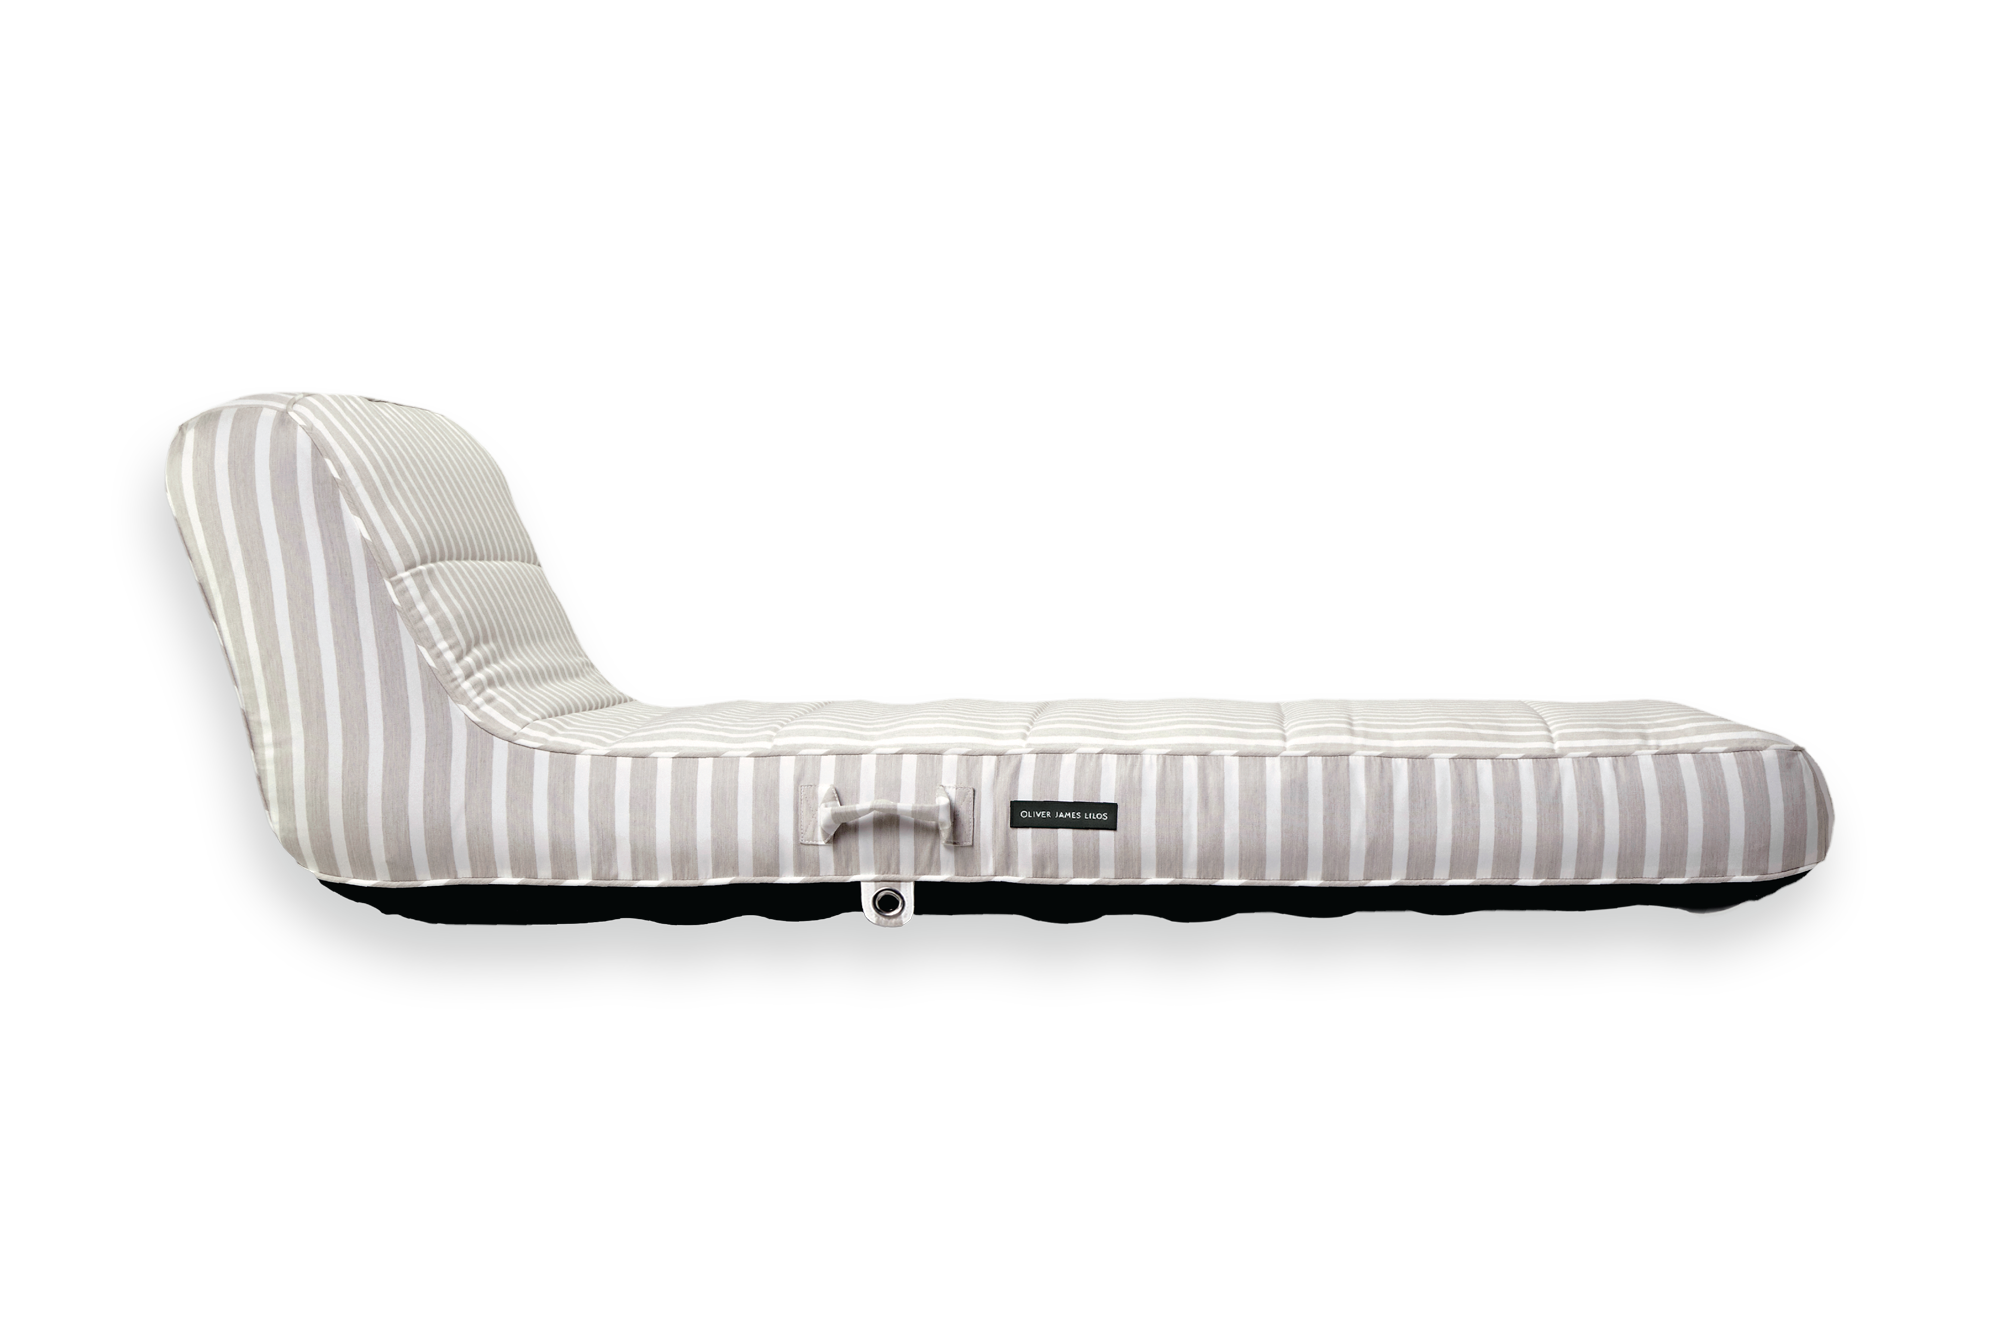 The side of a luxury pool float in white and beige striped fabric.